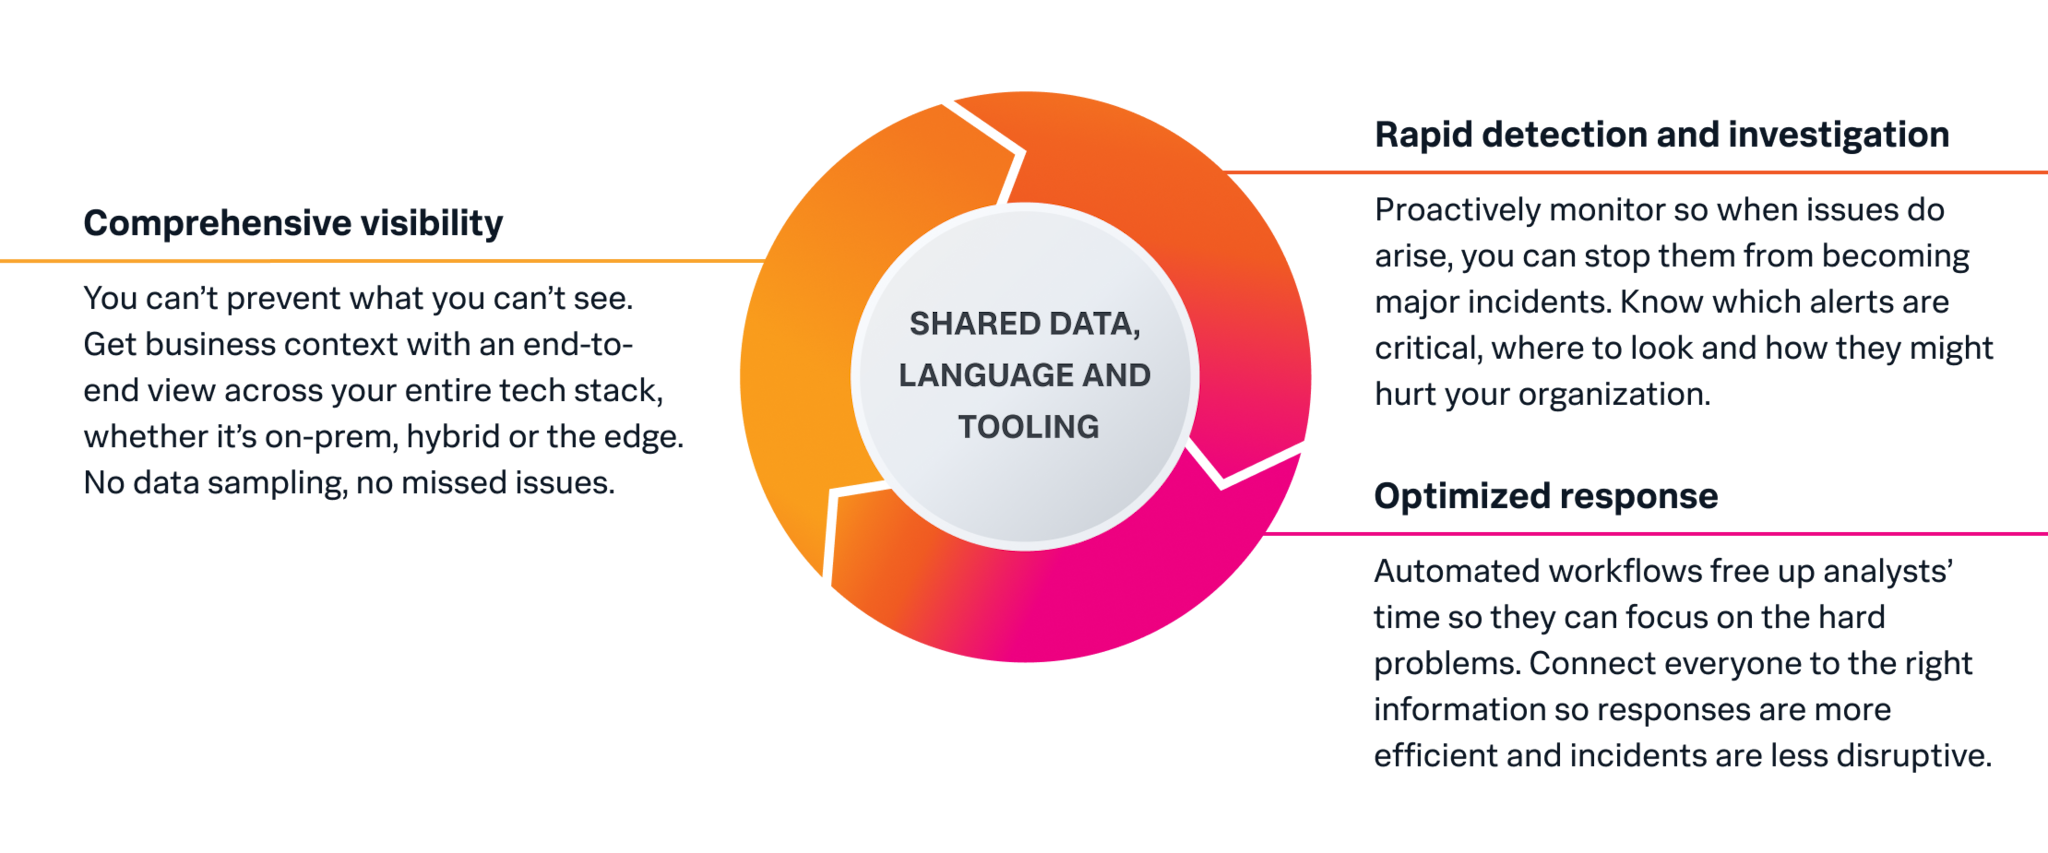 Shared Data, Language, and Tooling chart: Comprehensive visibility, Rapid detection and investigation, and Optimized response